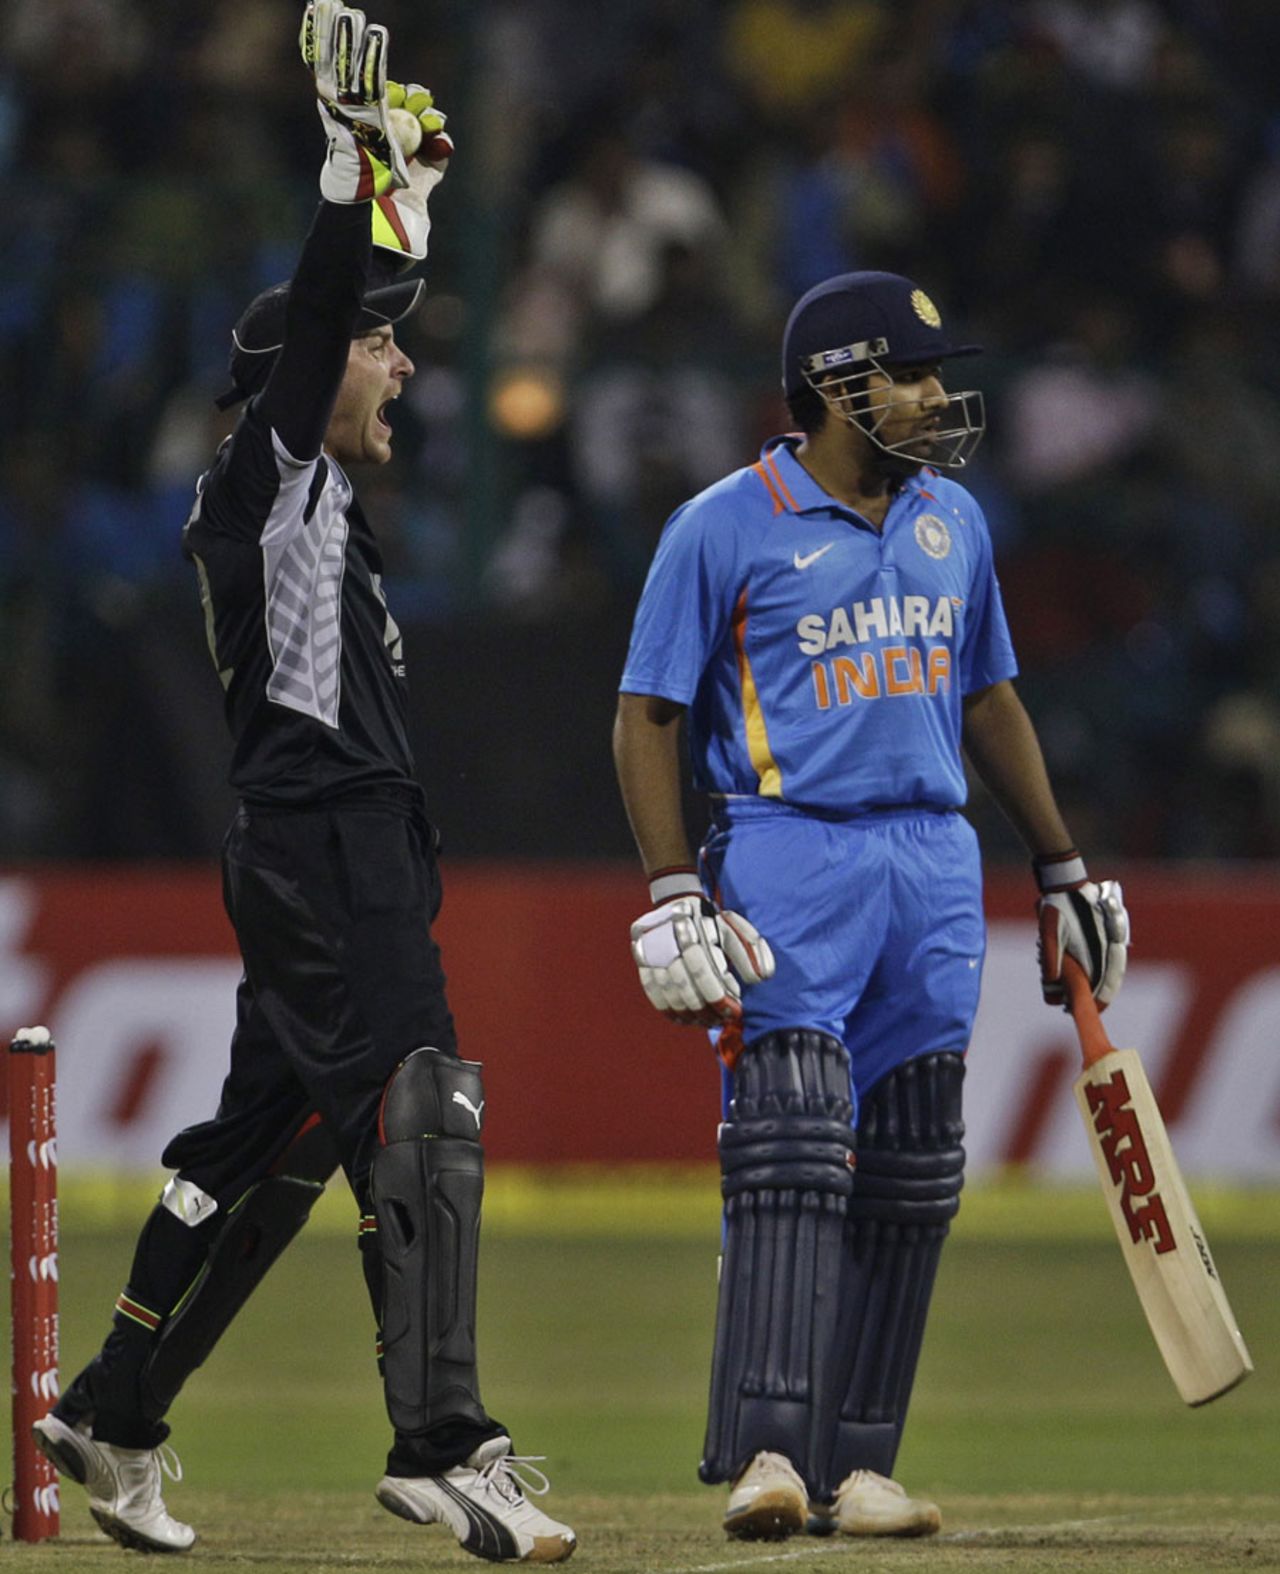 Rohit Sharma edges one to Brendon McCullum but the umpire gives him a reprieve, India v New Zealand, 4th ODI, Bangalore, December 7, 2010